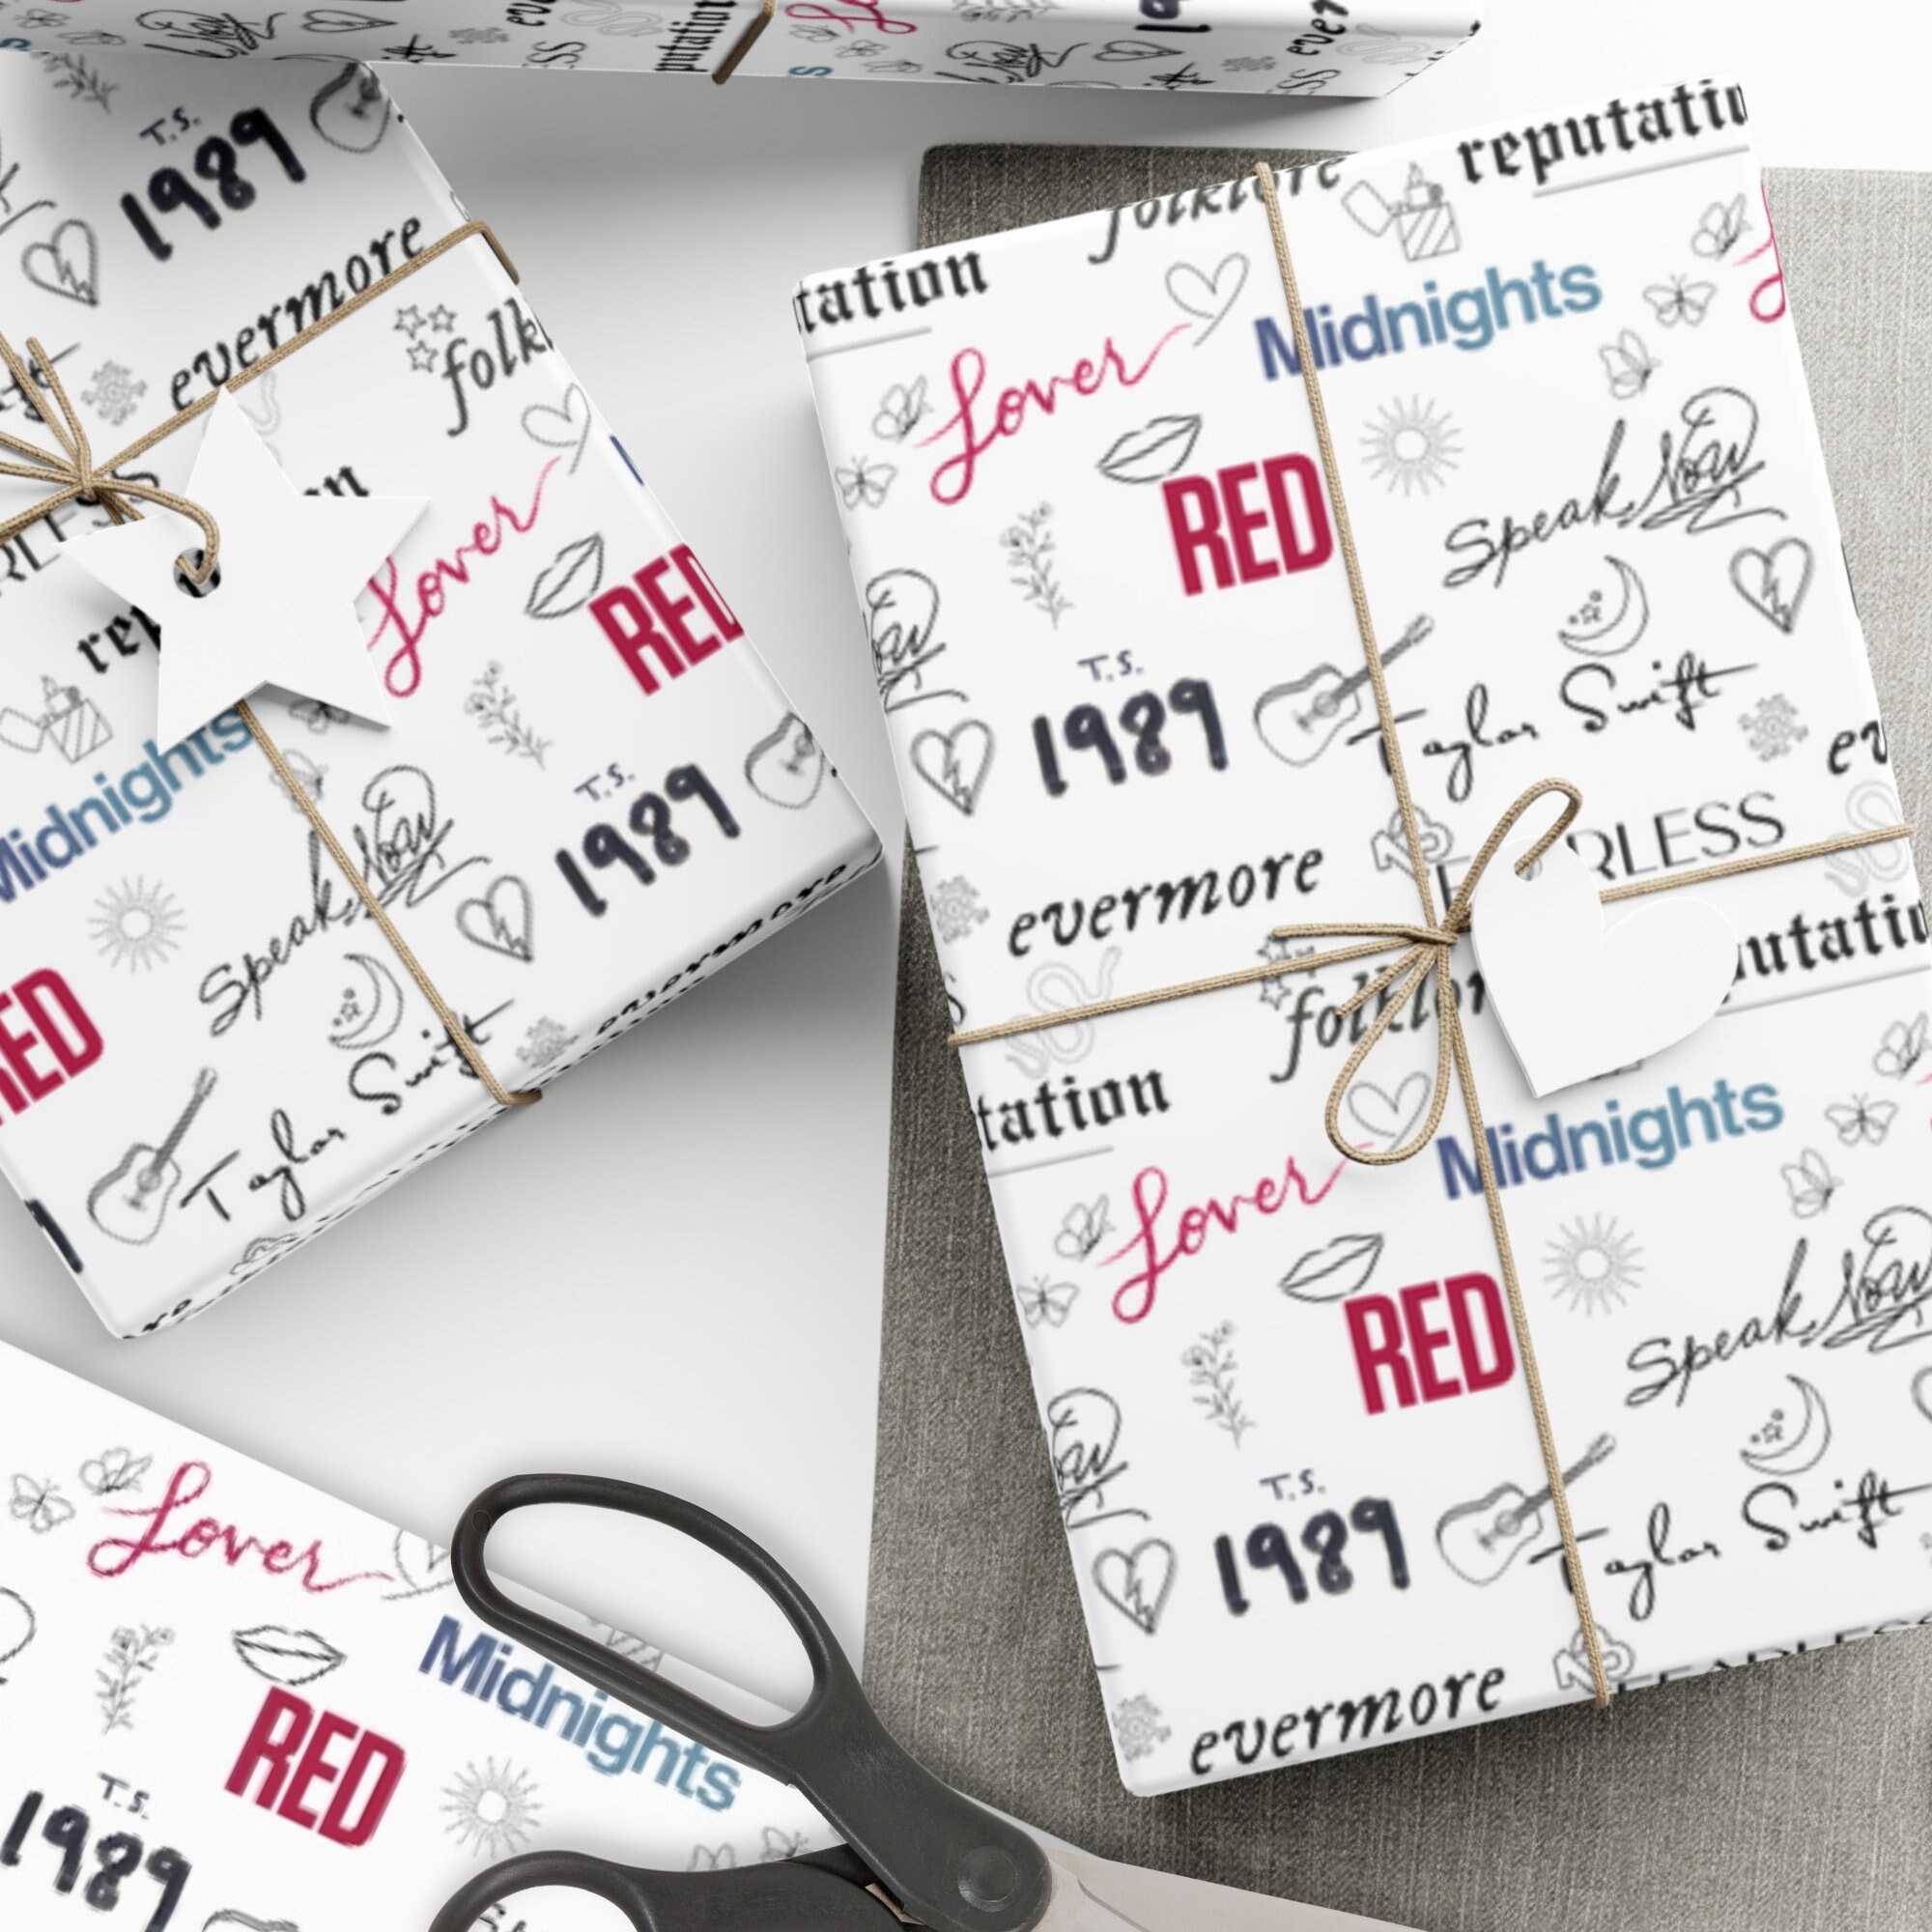 Taylor Swift Inspired Wrapping paper sheets — Super Awesome Mix